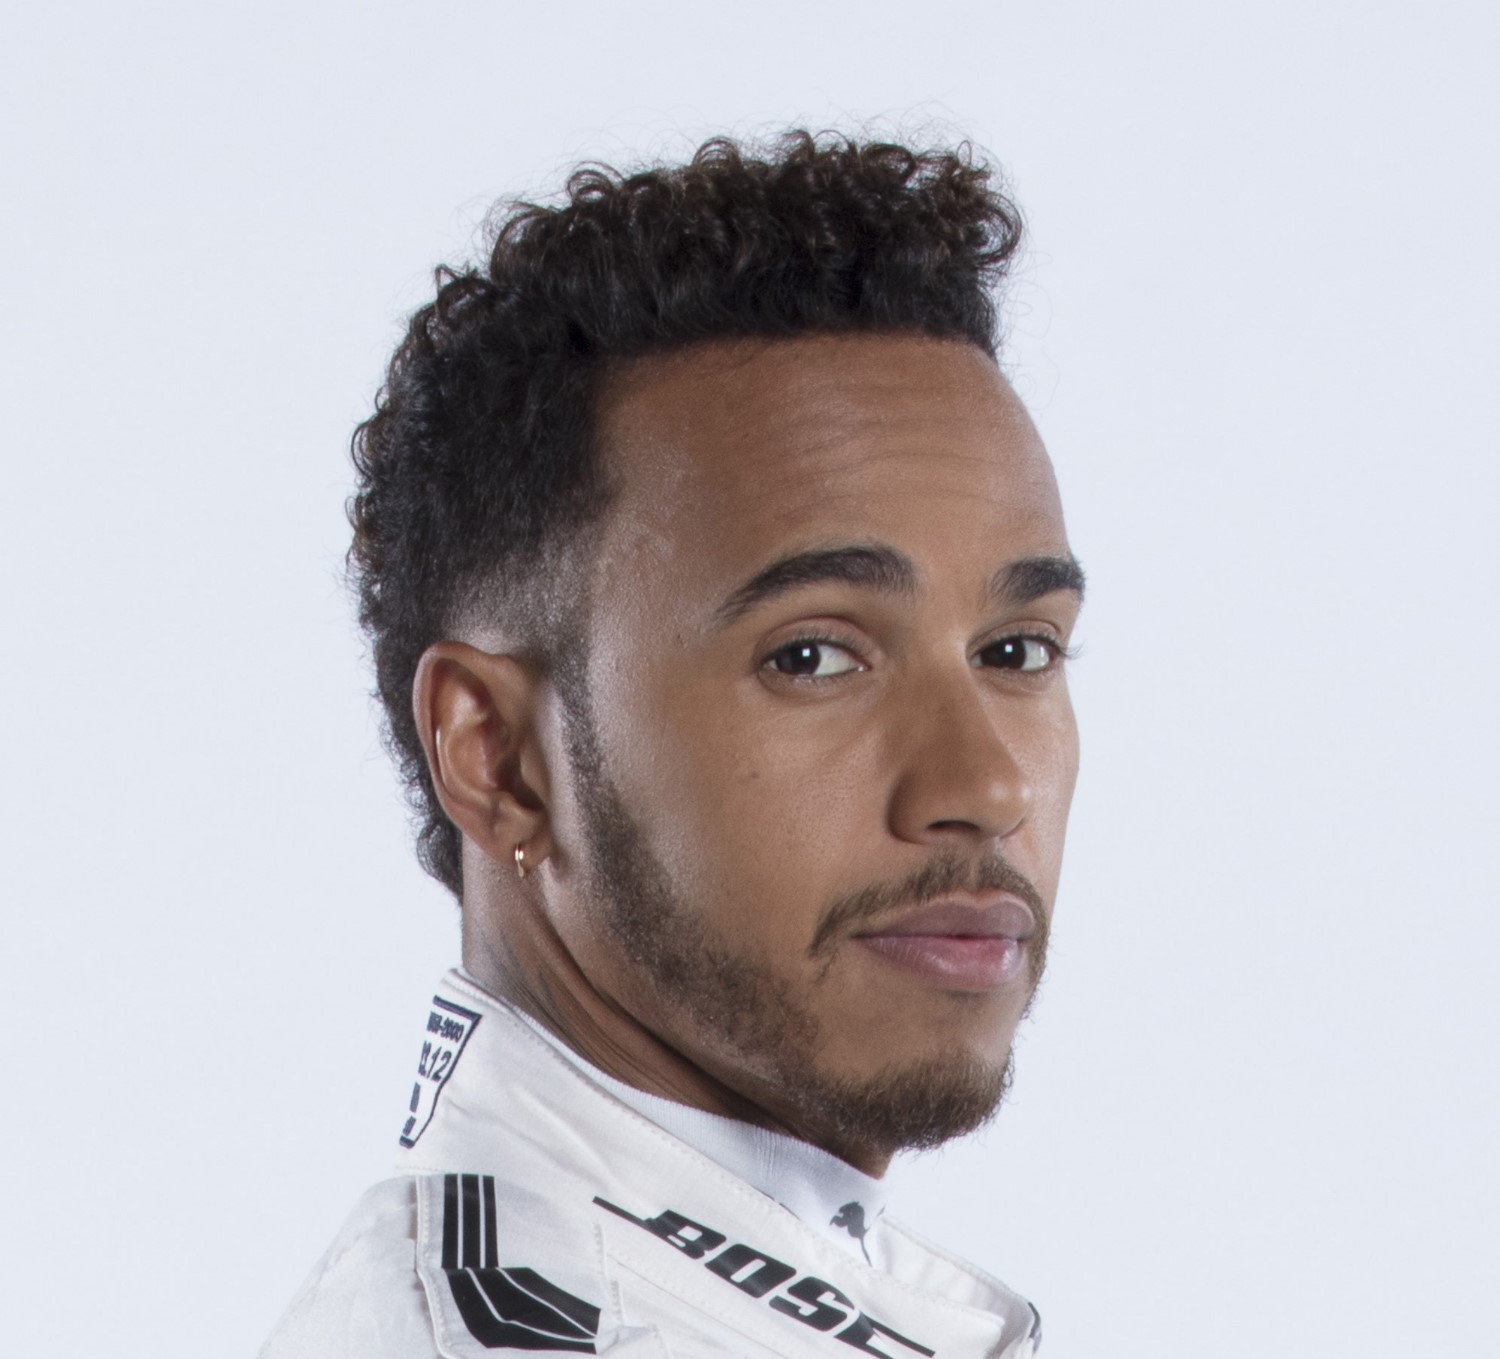 Hamilton is the man to beat this weekend